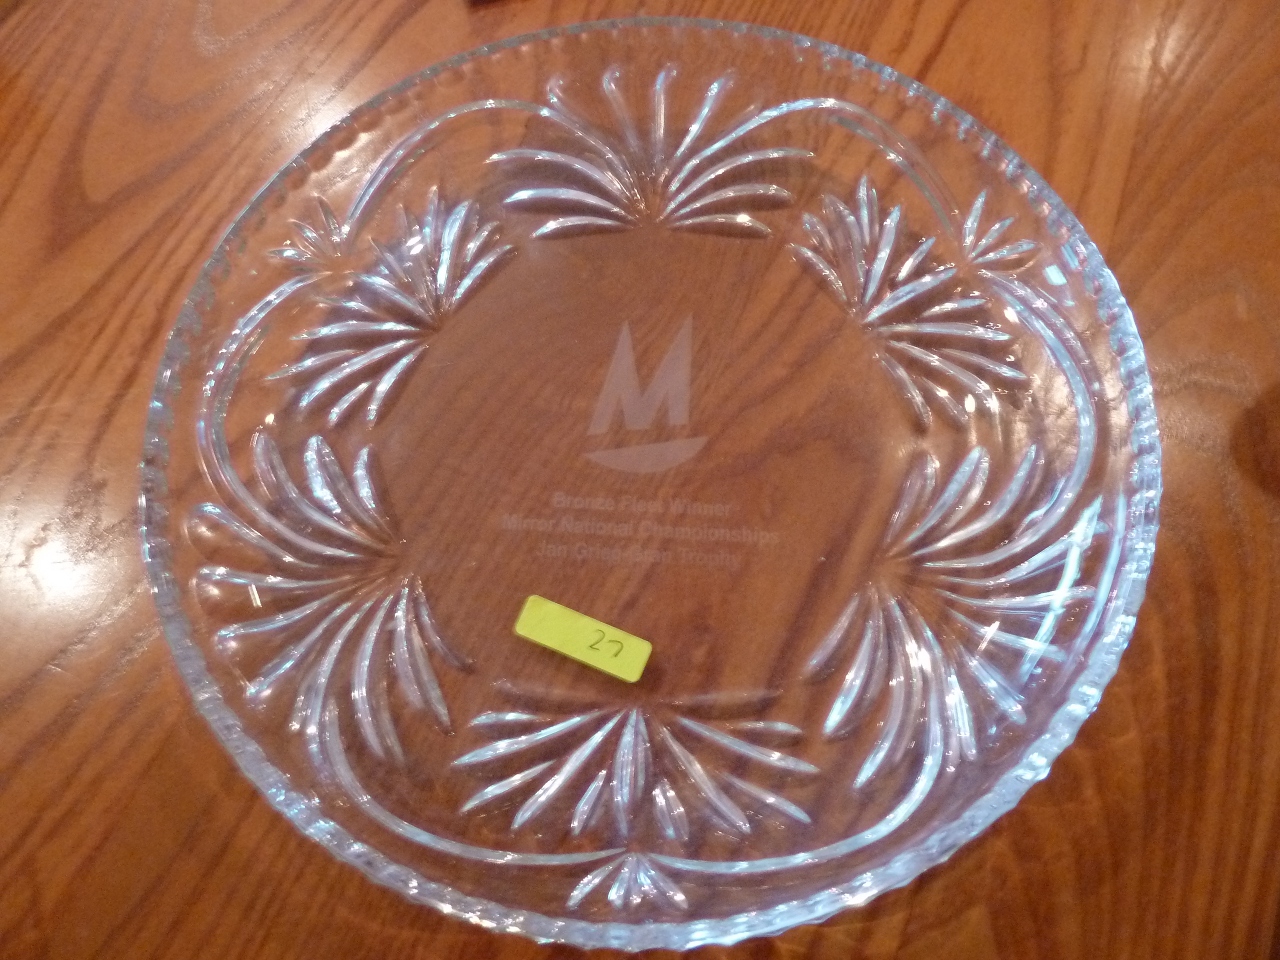 An engraved glass plate